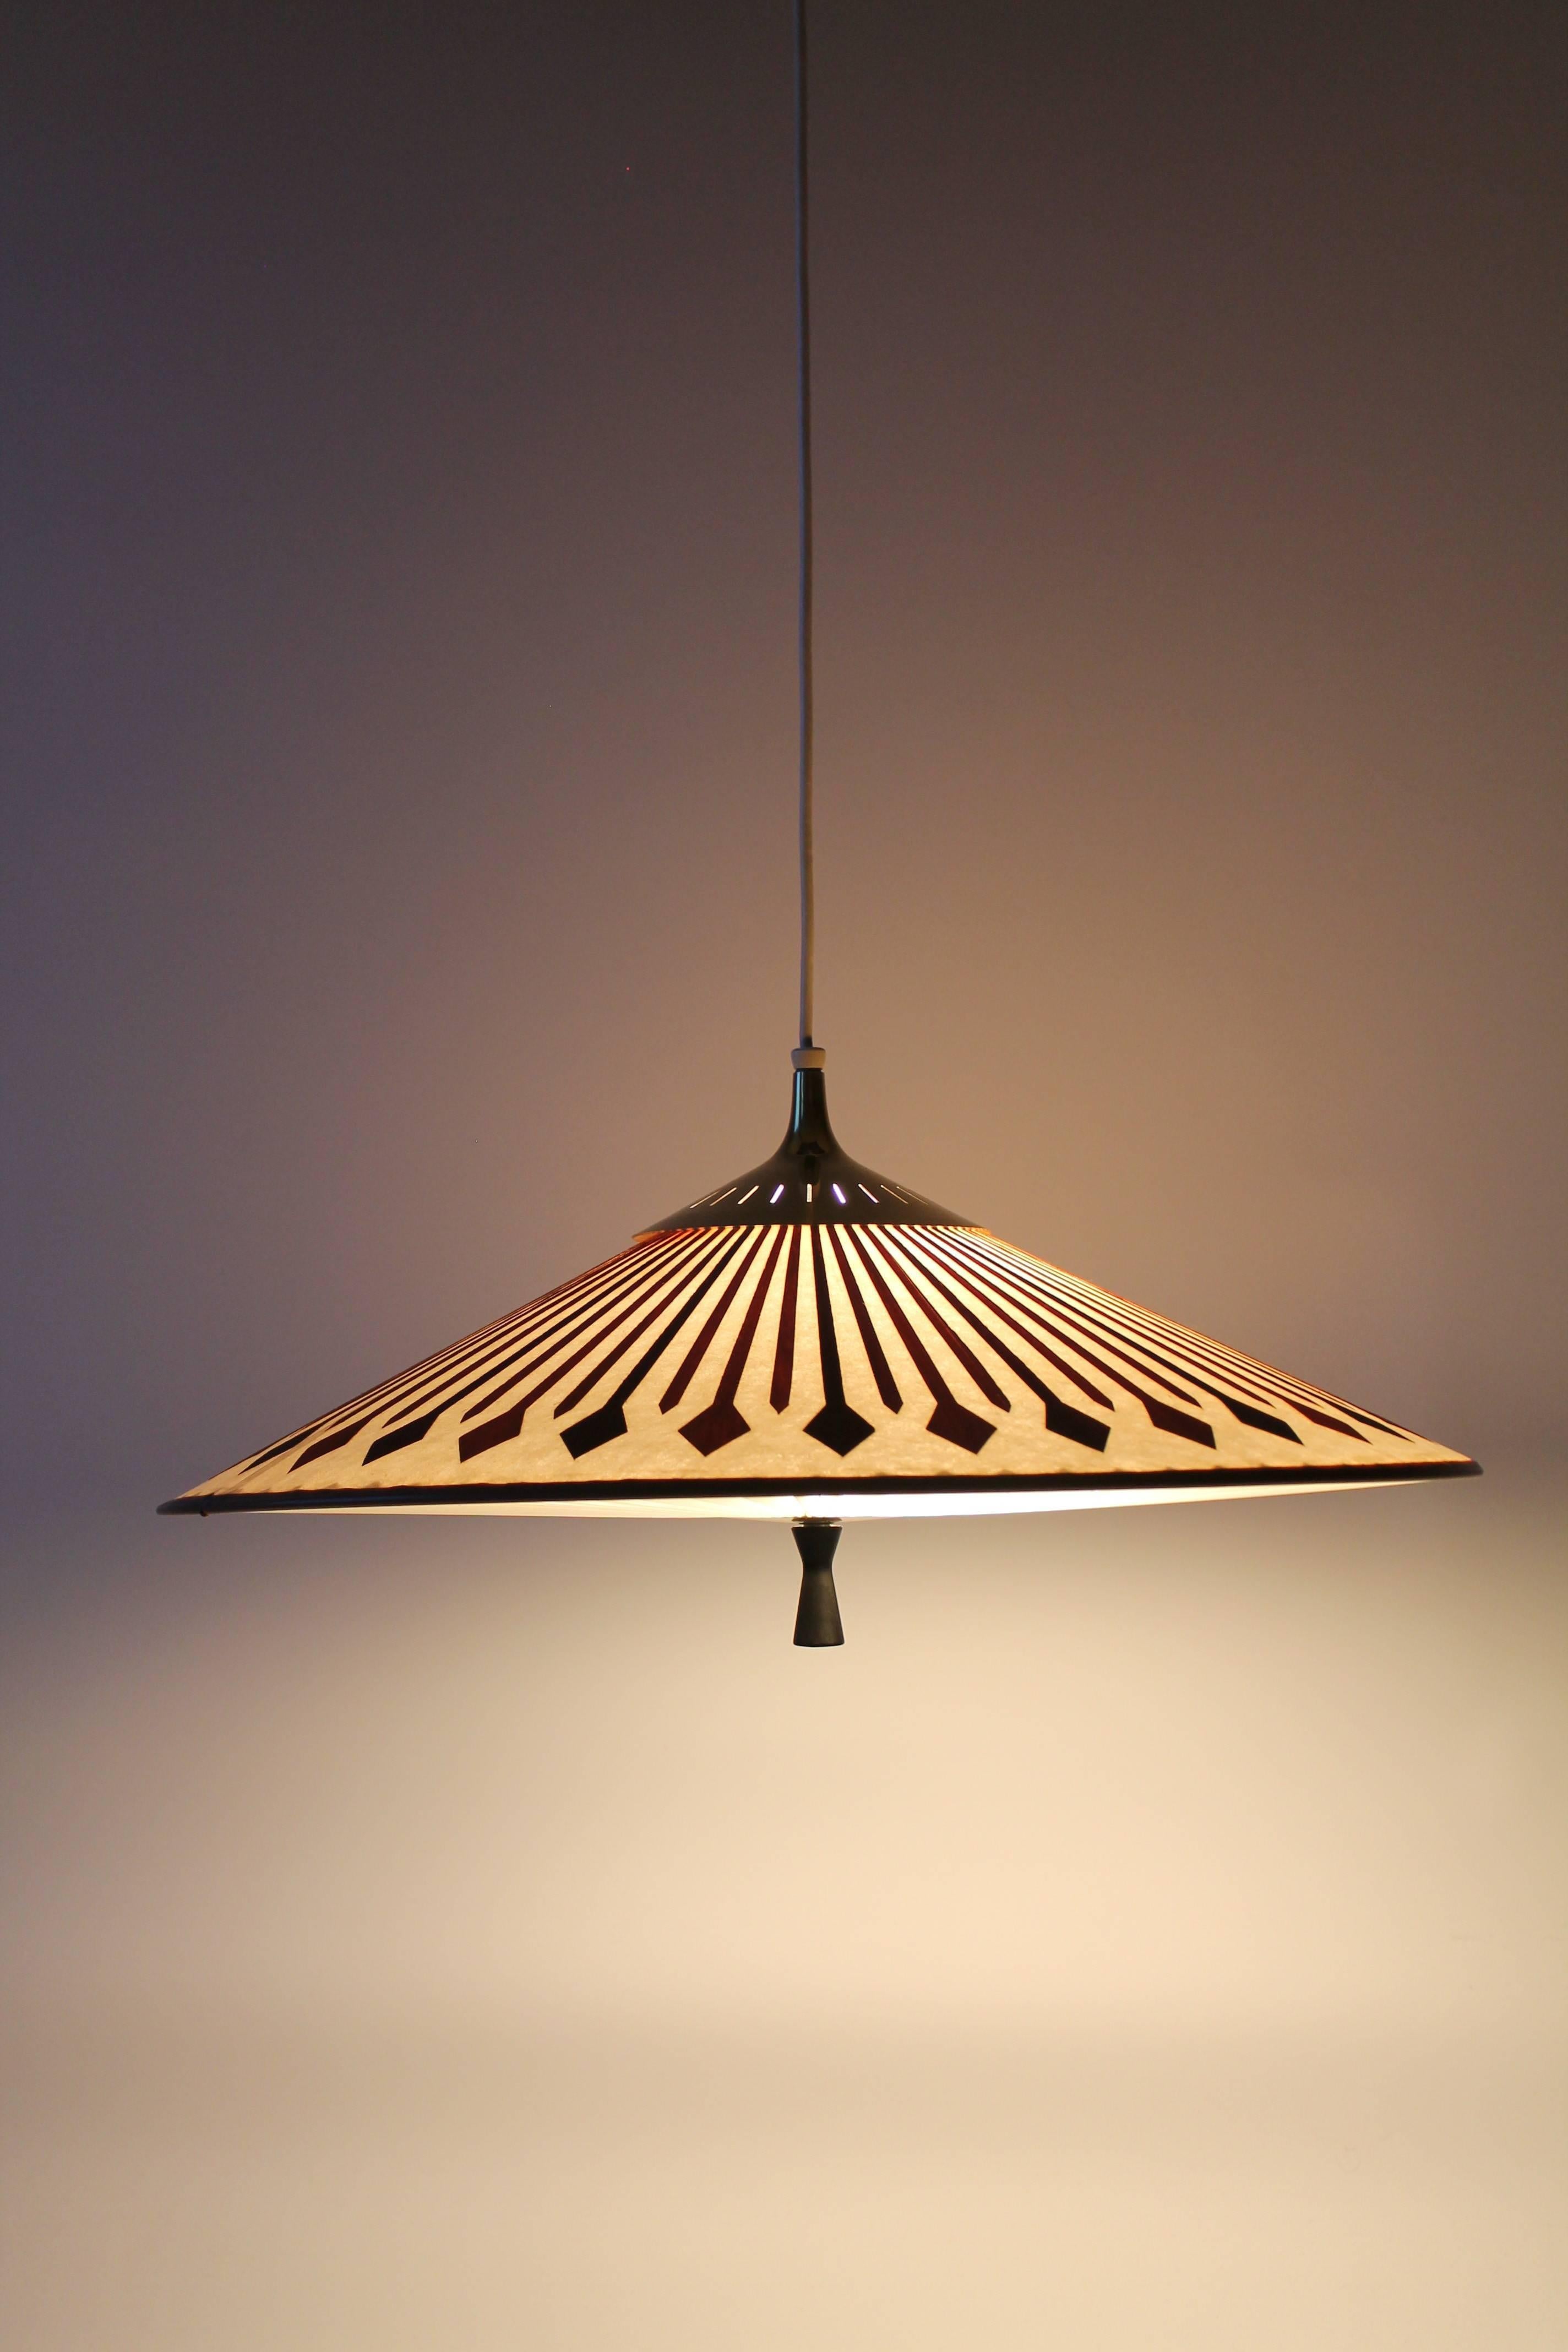 American G. Thurston Fiberglass Chandelier with Brass and Teak Accent, 1960s, USA